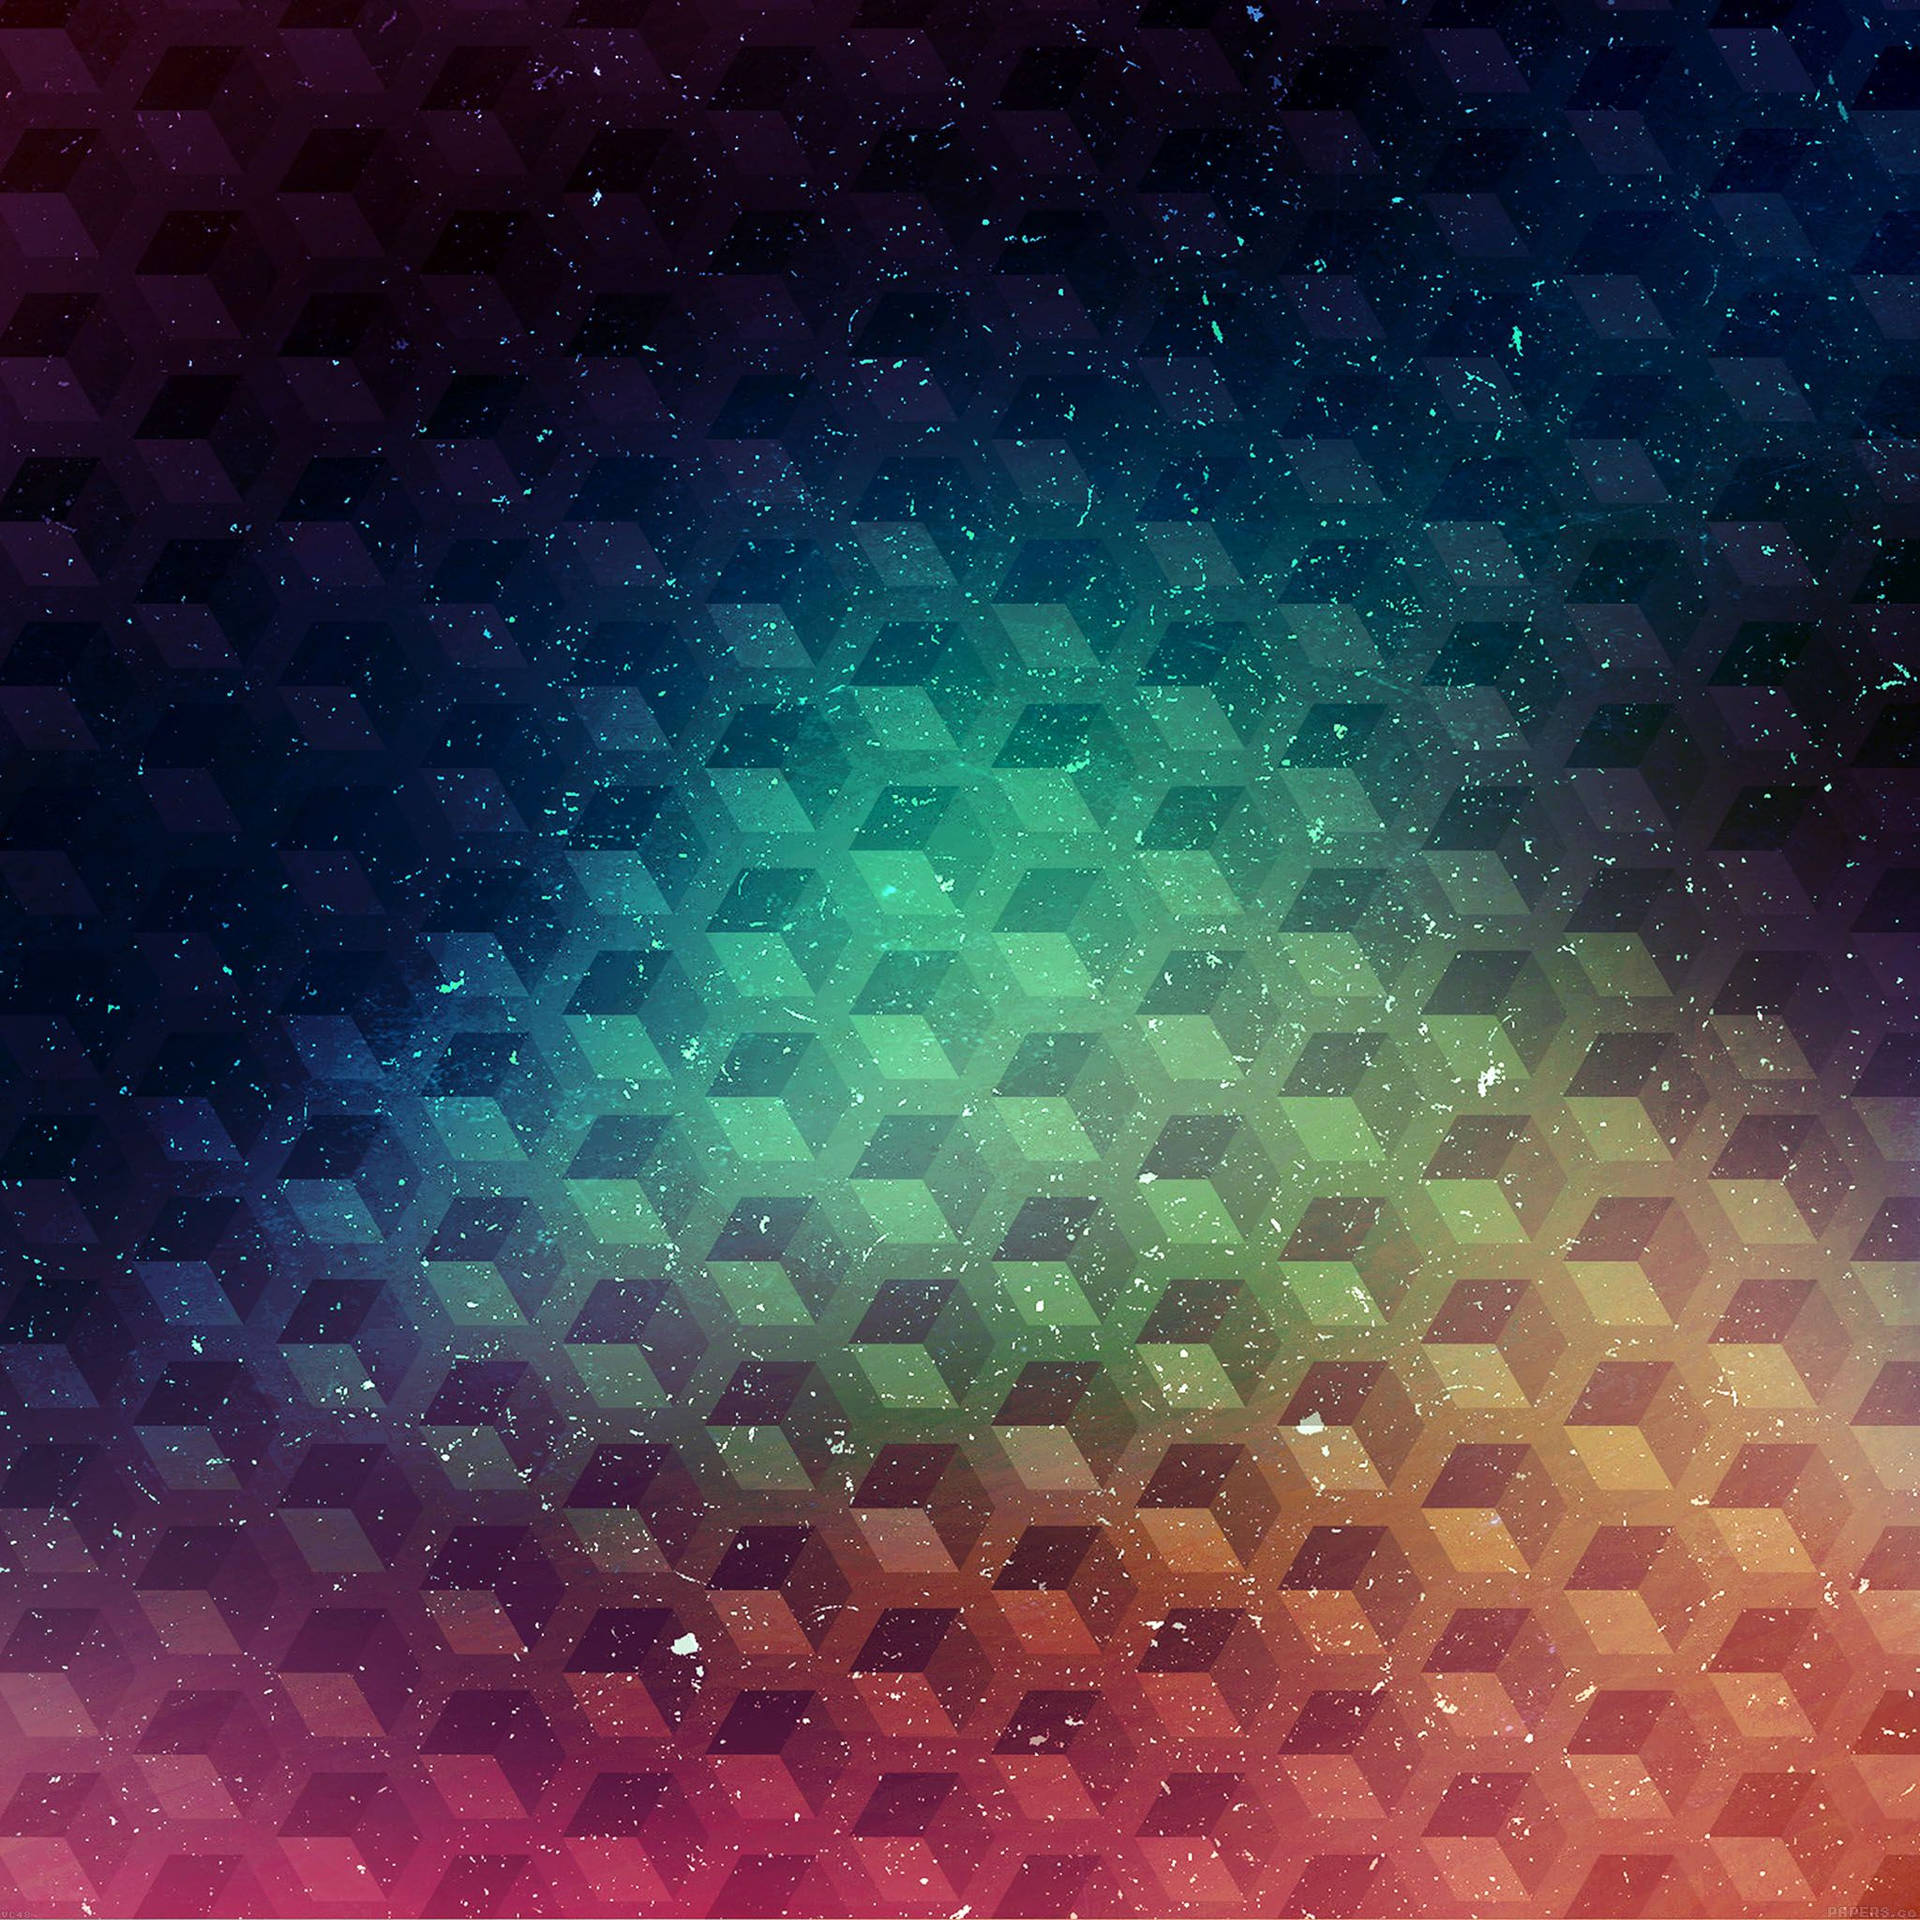 Geometric Abstract Design For Ipad Background